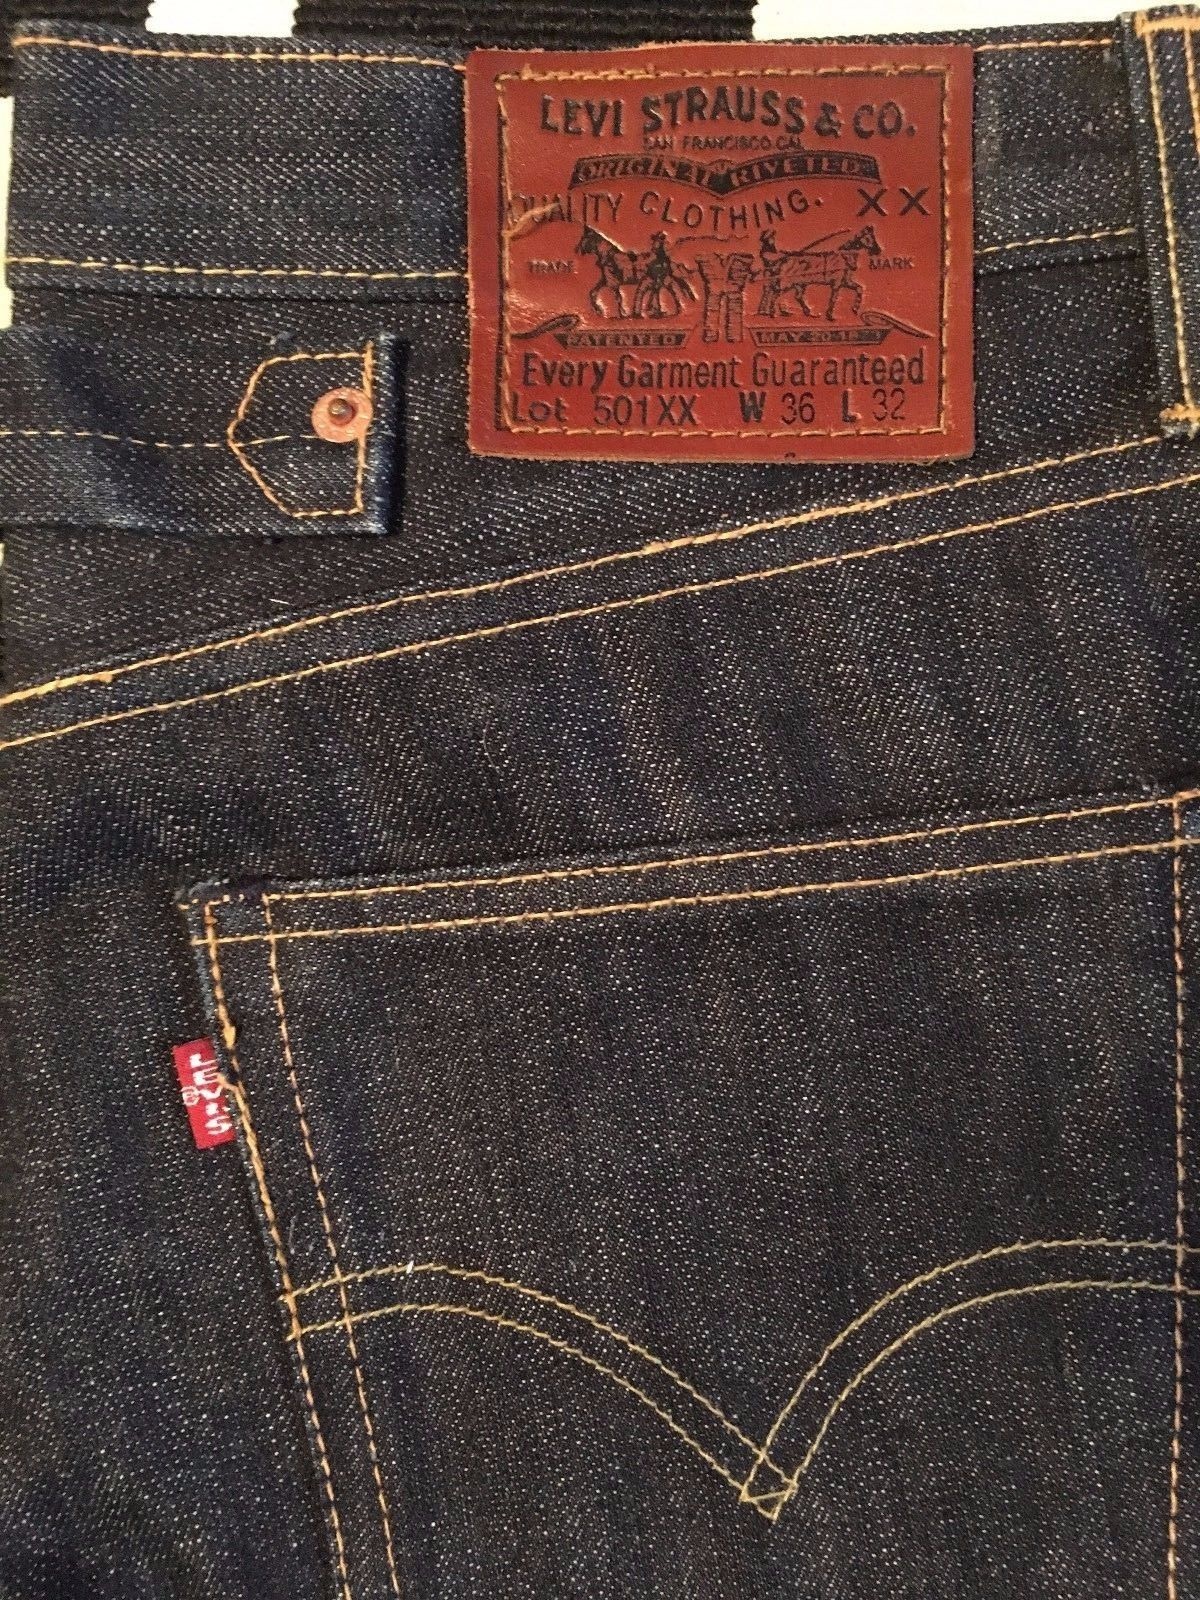 levis without leather patch